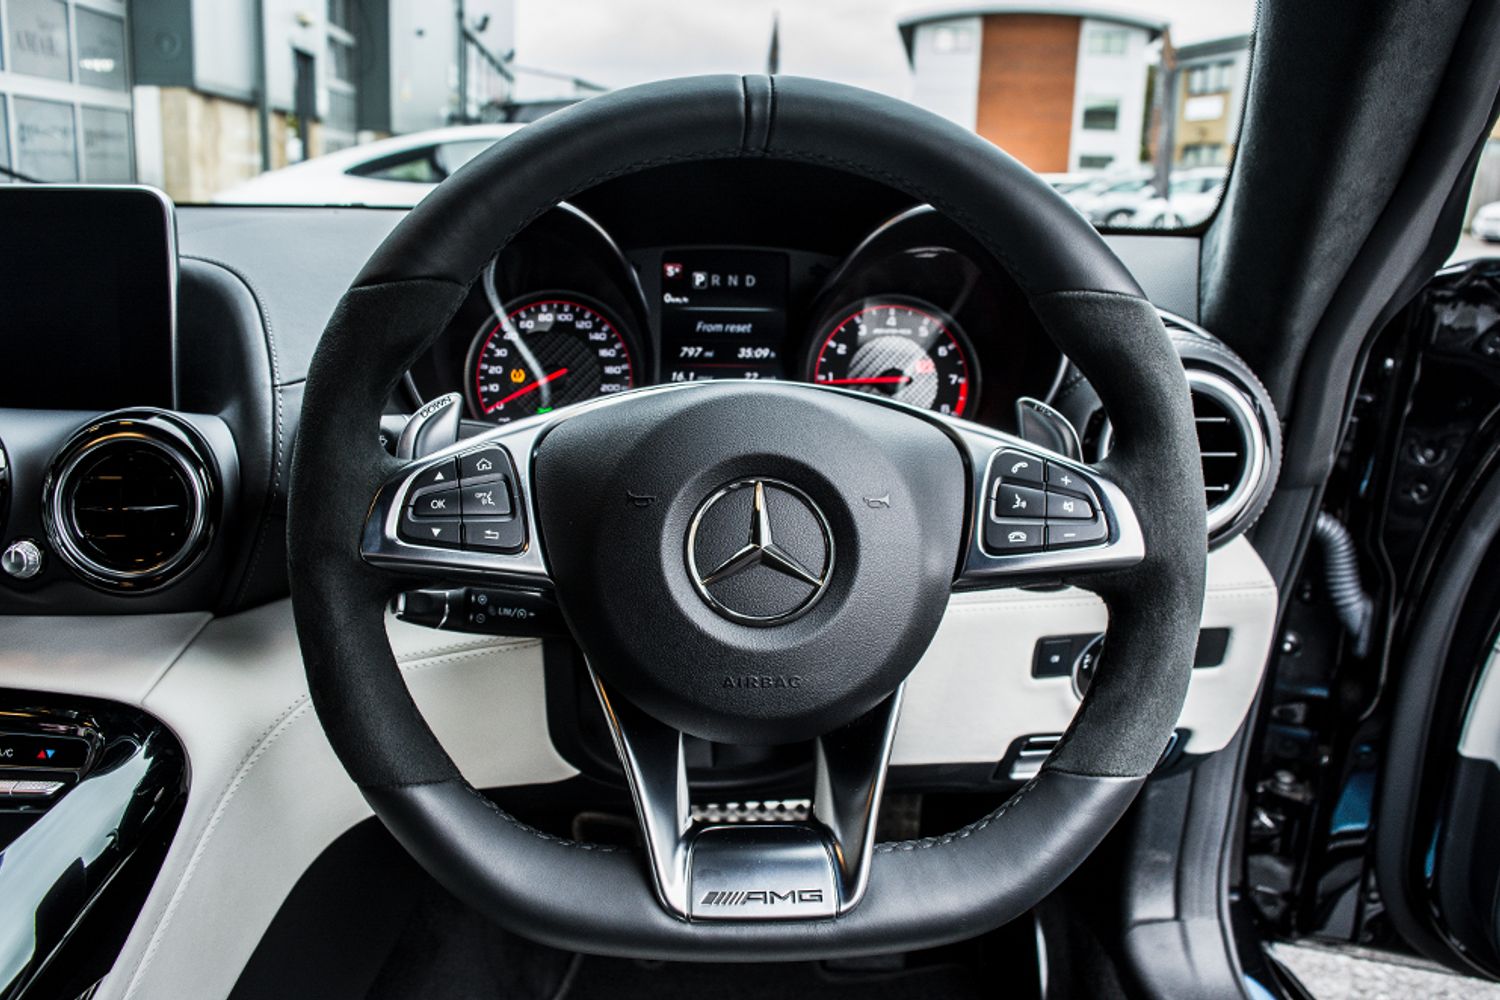 MERCEDES-BENZ GT COUPE 4.0 AMG GT S 2DR AUTOMATIC